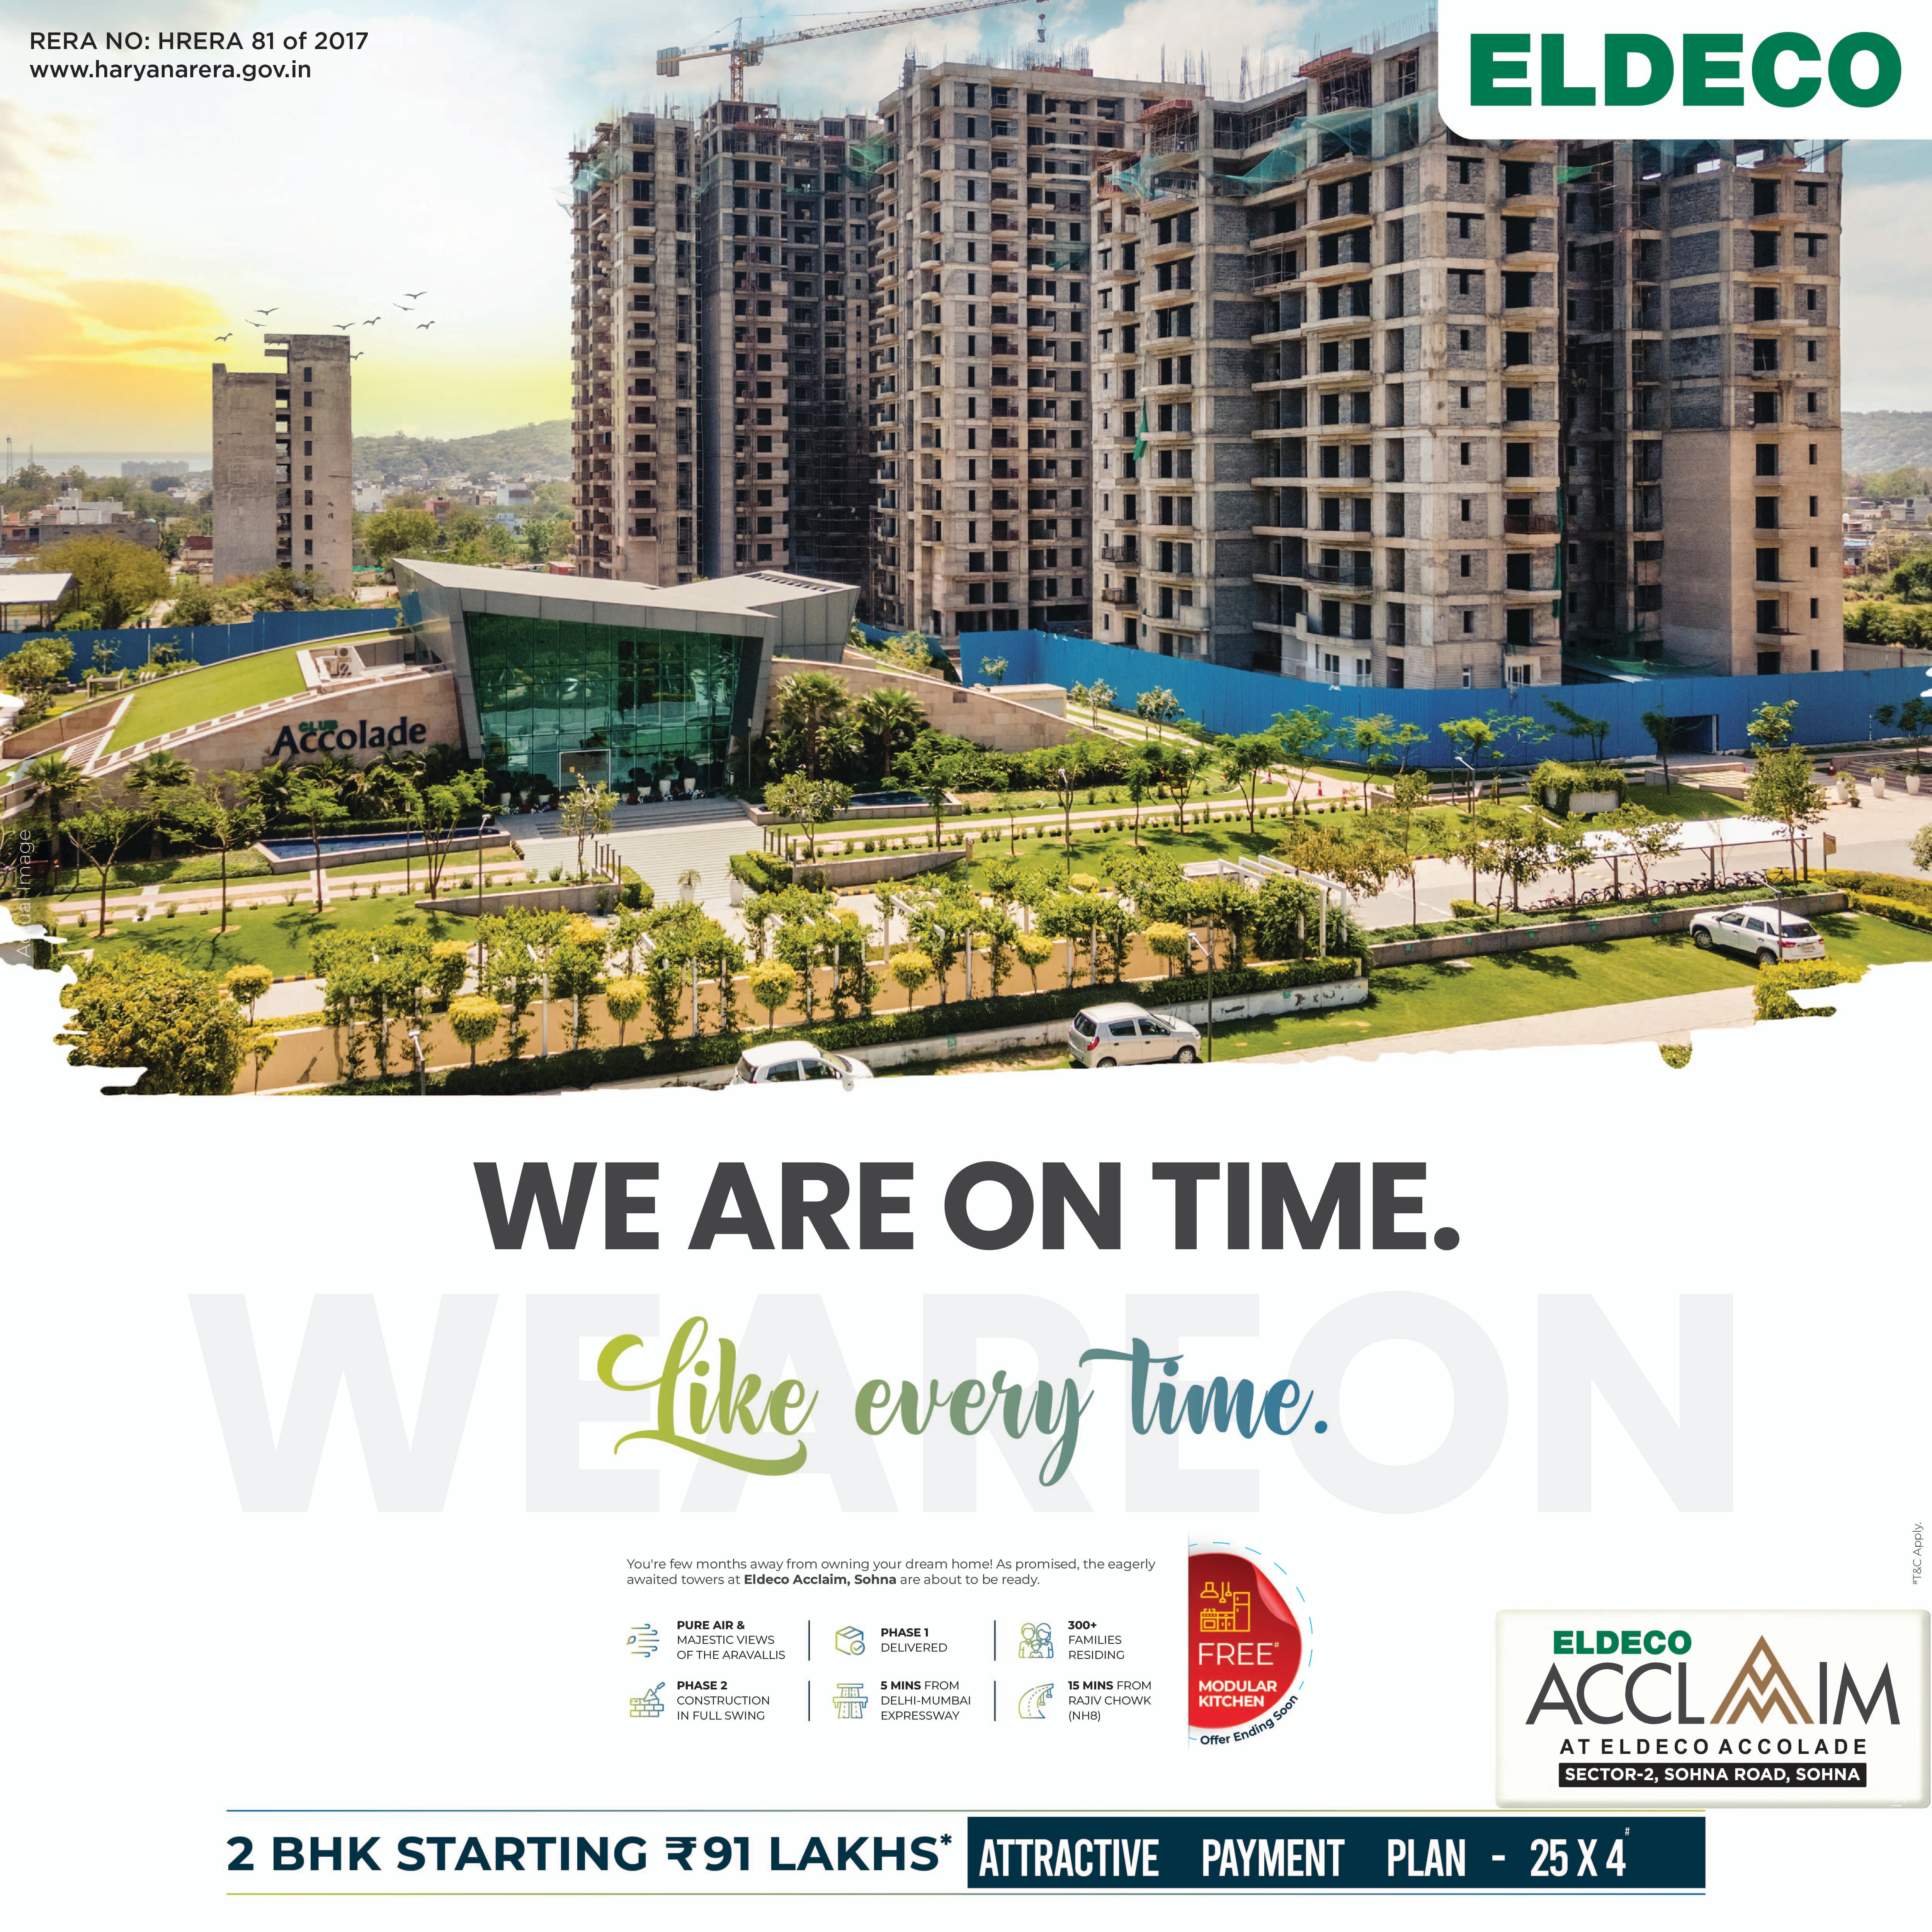 Sprawled over 13 acres with a view of aravalli hills at Eldeco Acclaim, Sohna, Gurgaon Update